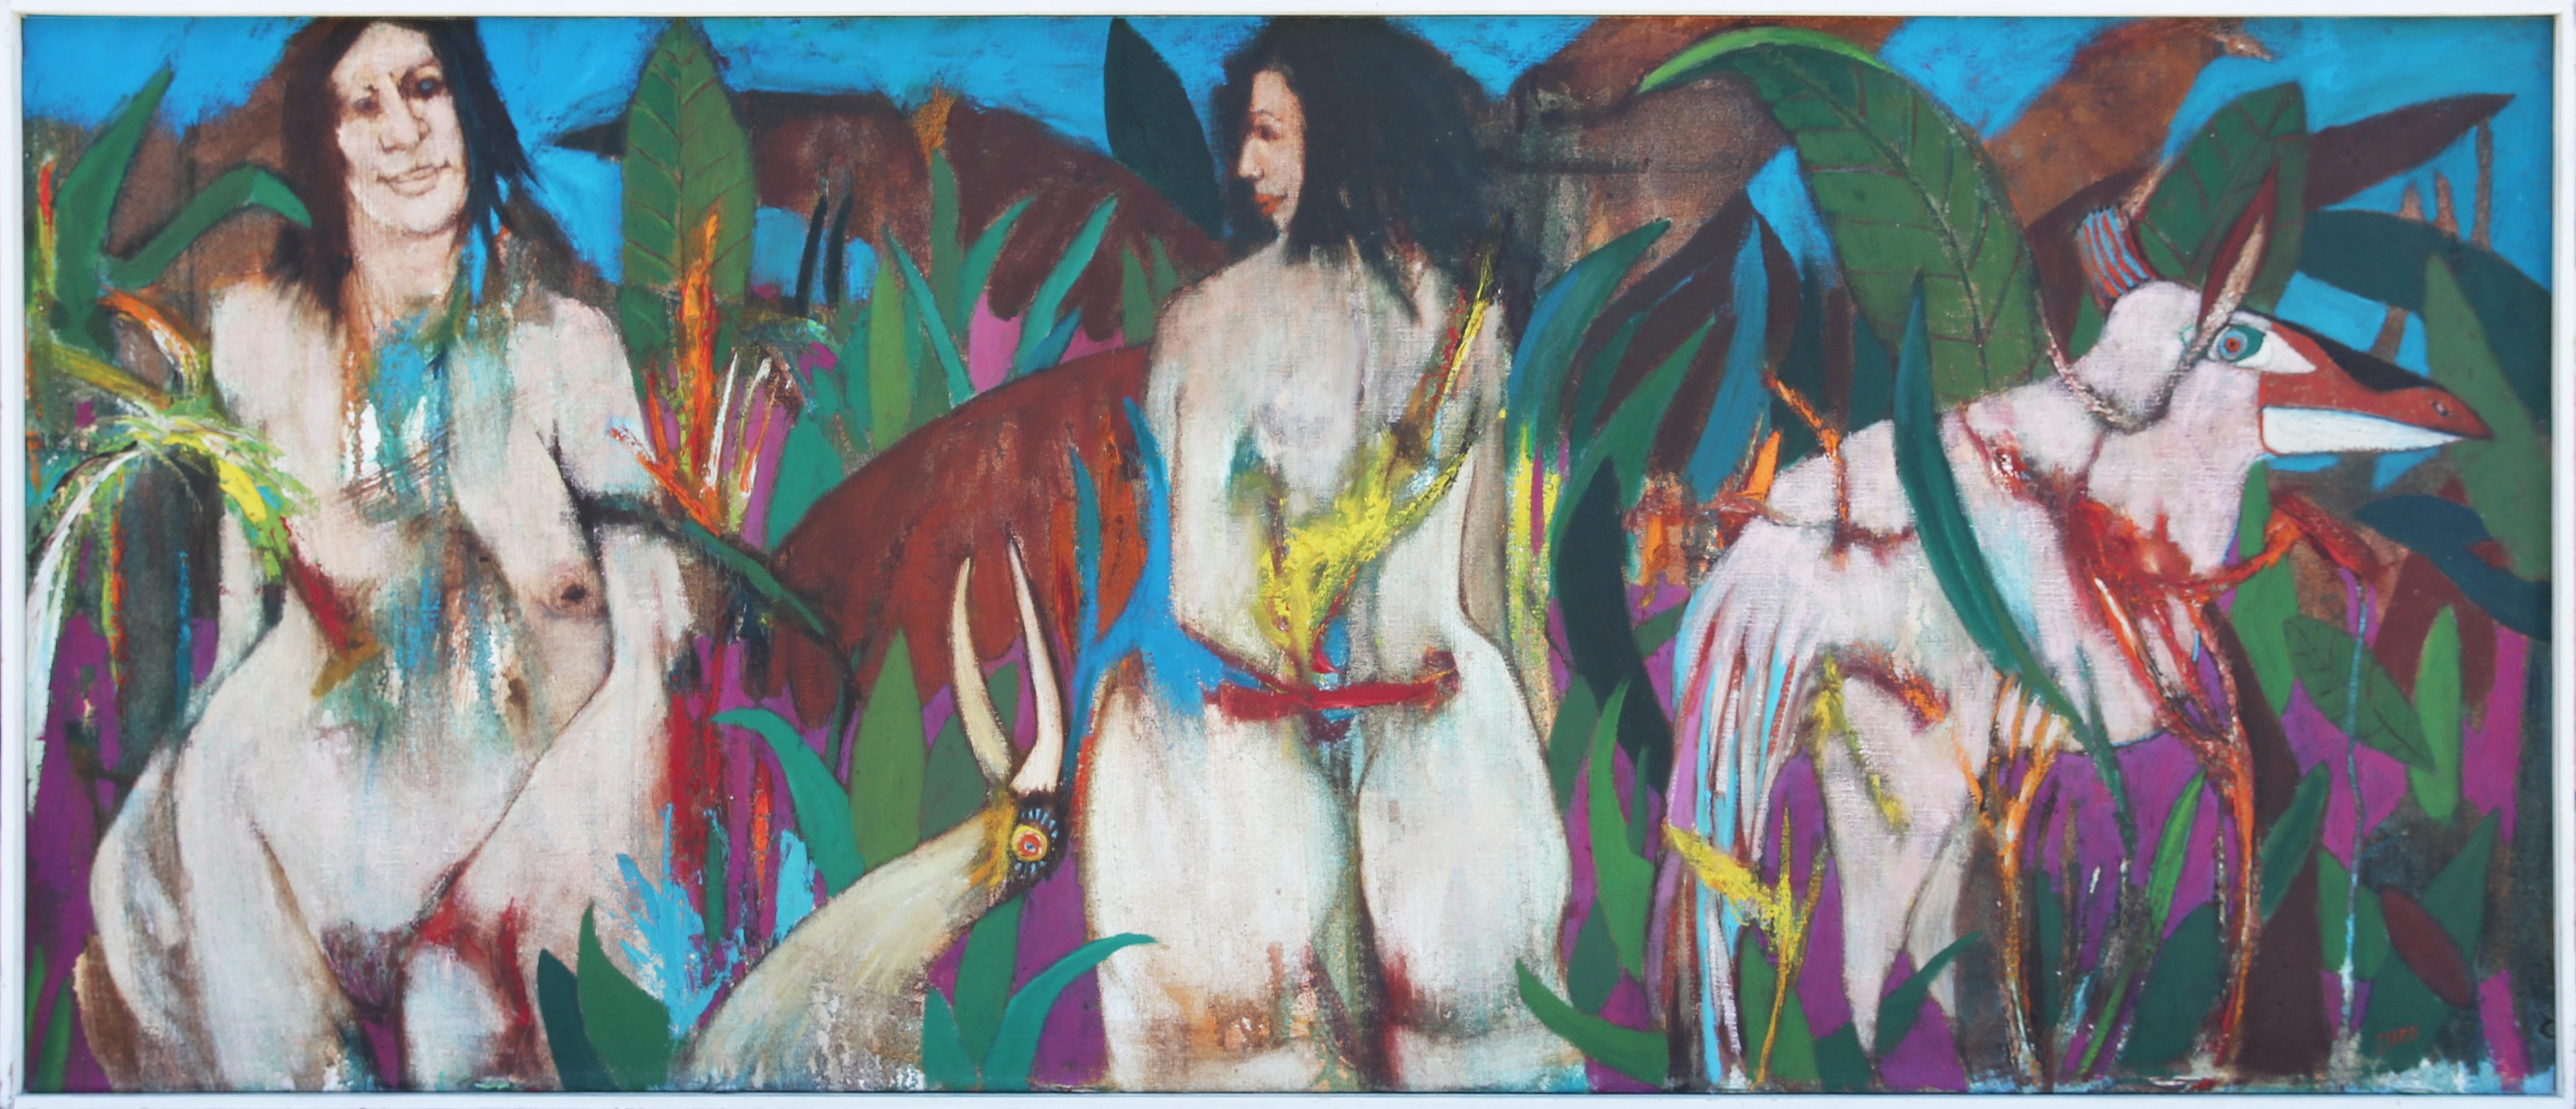 Don Snell Animal Painting - Modern Colorful Tropical Abstract Painting of Two Female Figures and an Animal